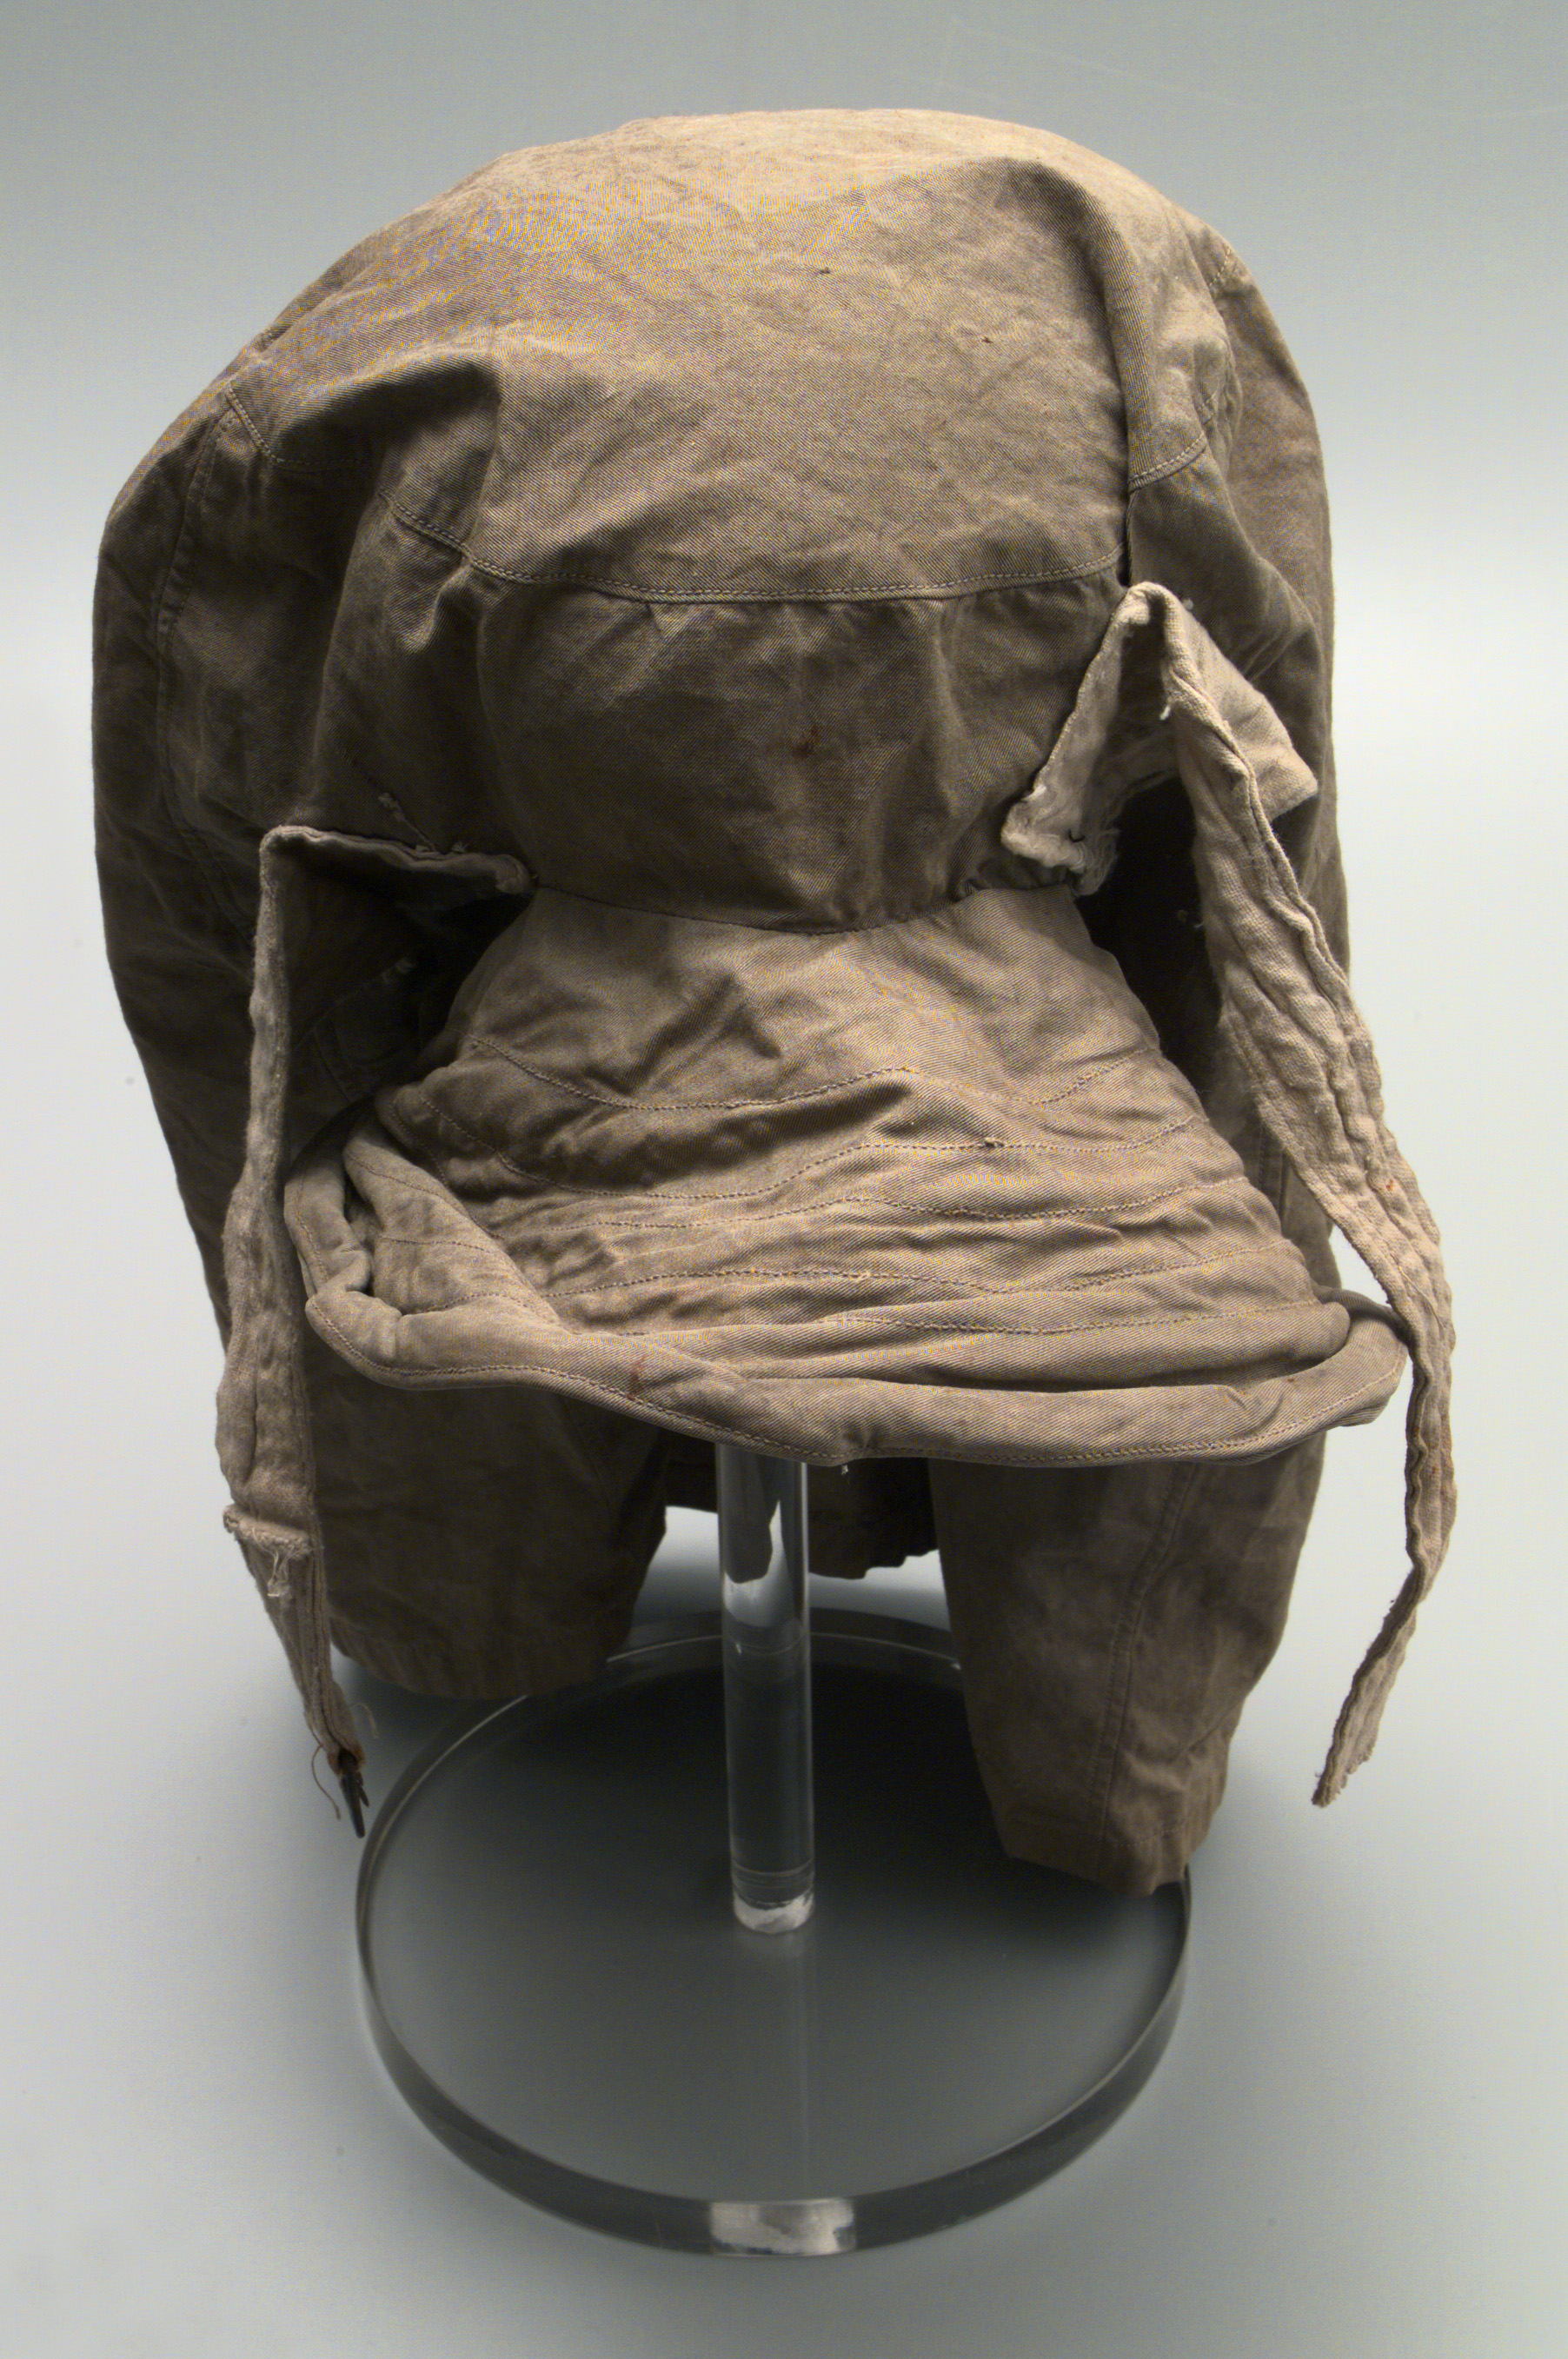 Hood used by Charles Laseron during Mawson's Australasian Antarctic Expedition.